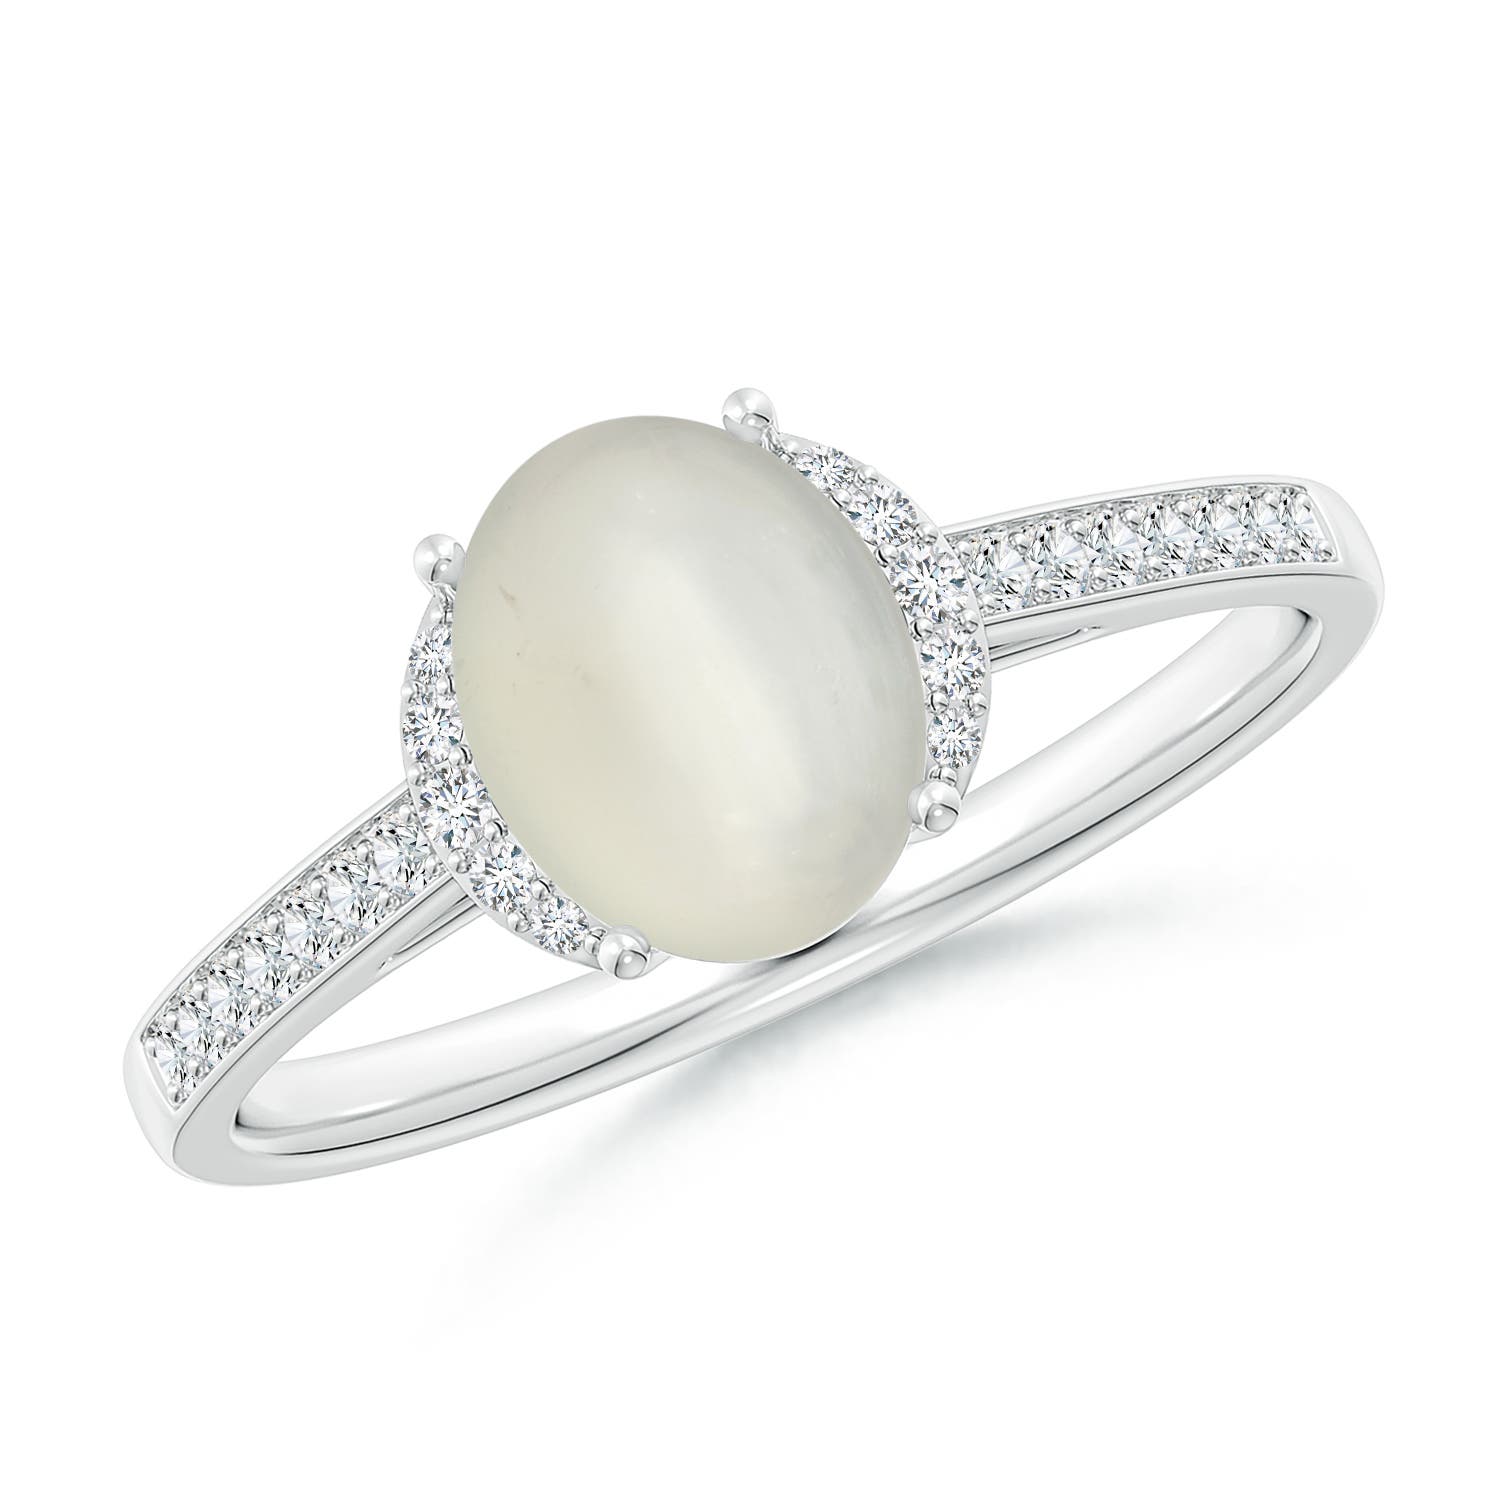 AAA - Moonstone / 1.23 CT / 14 KT White Gold